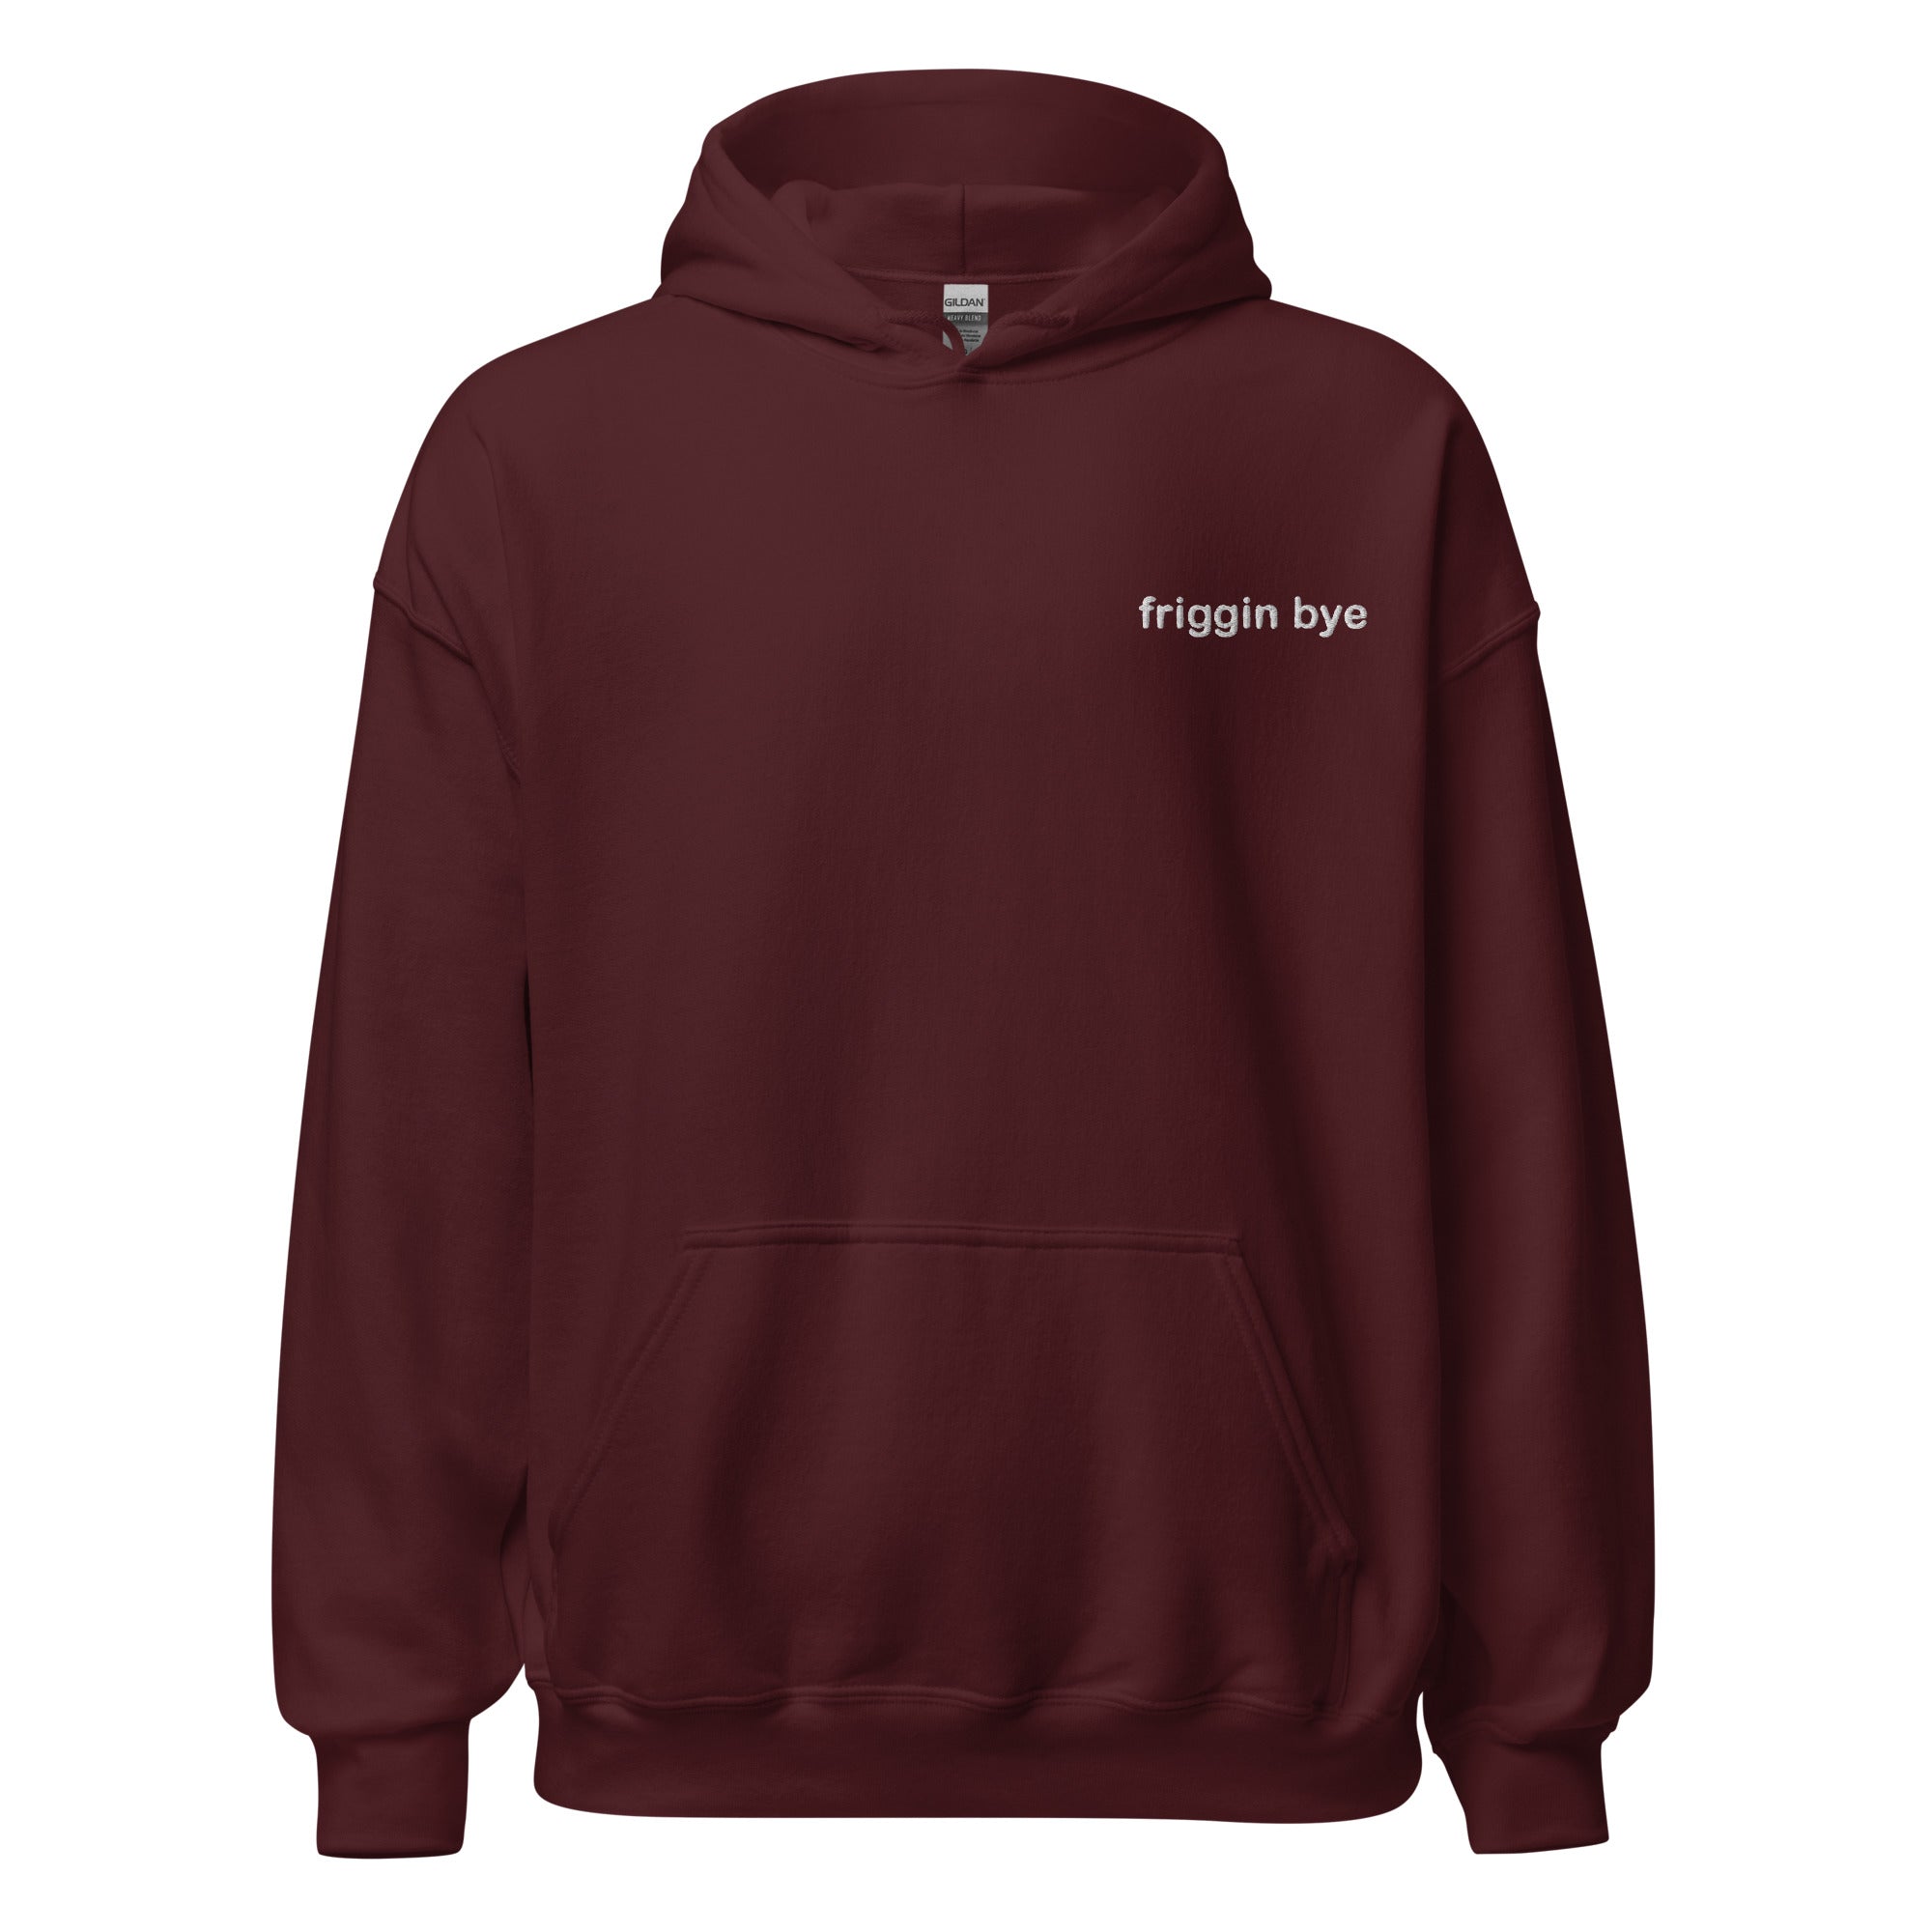 "Friggin Bye" Adult Hoodie Unisex White Embroidered